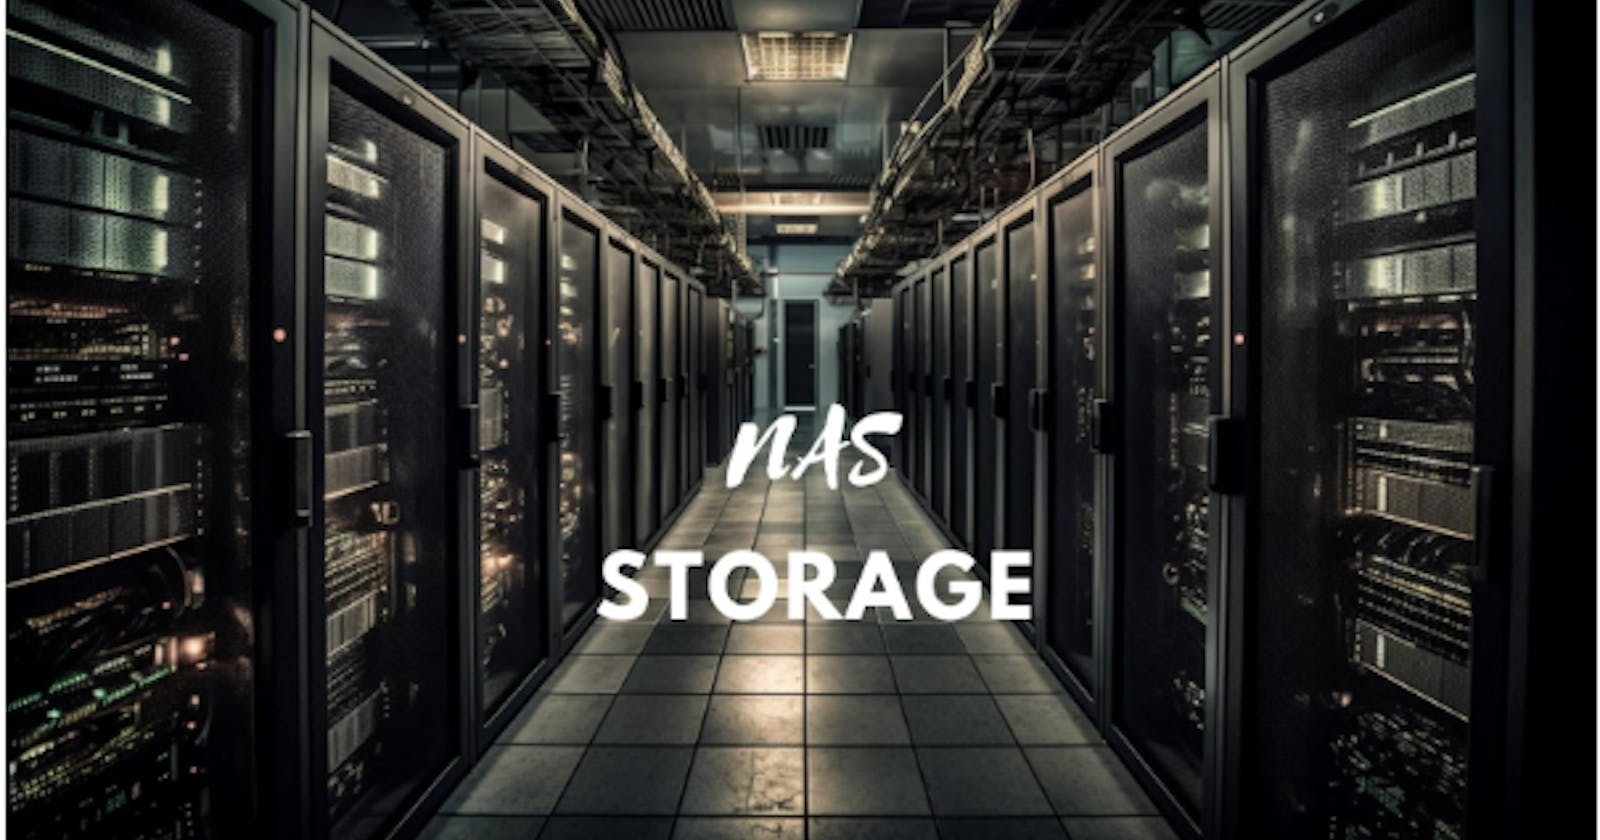 What is NAS Storage and why is it important for businesses?